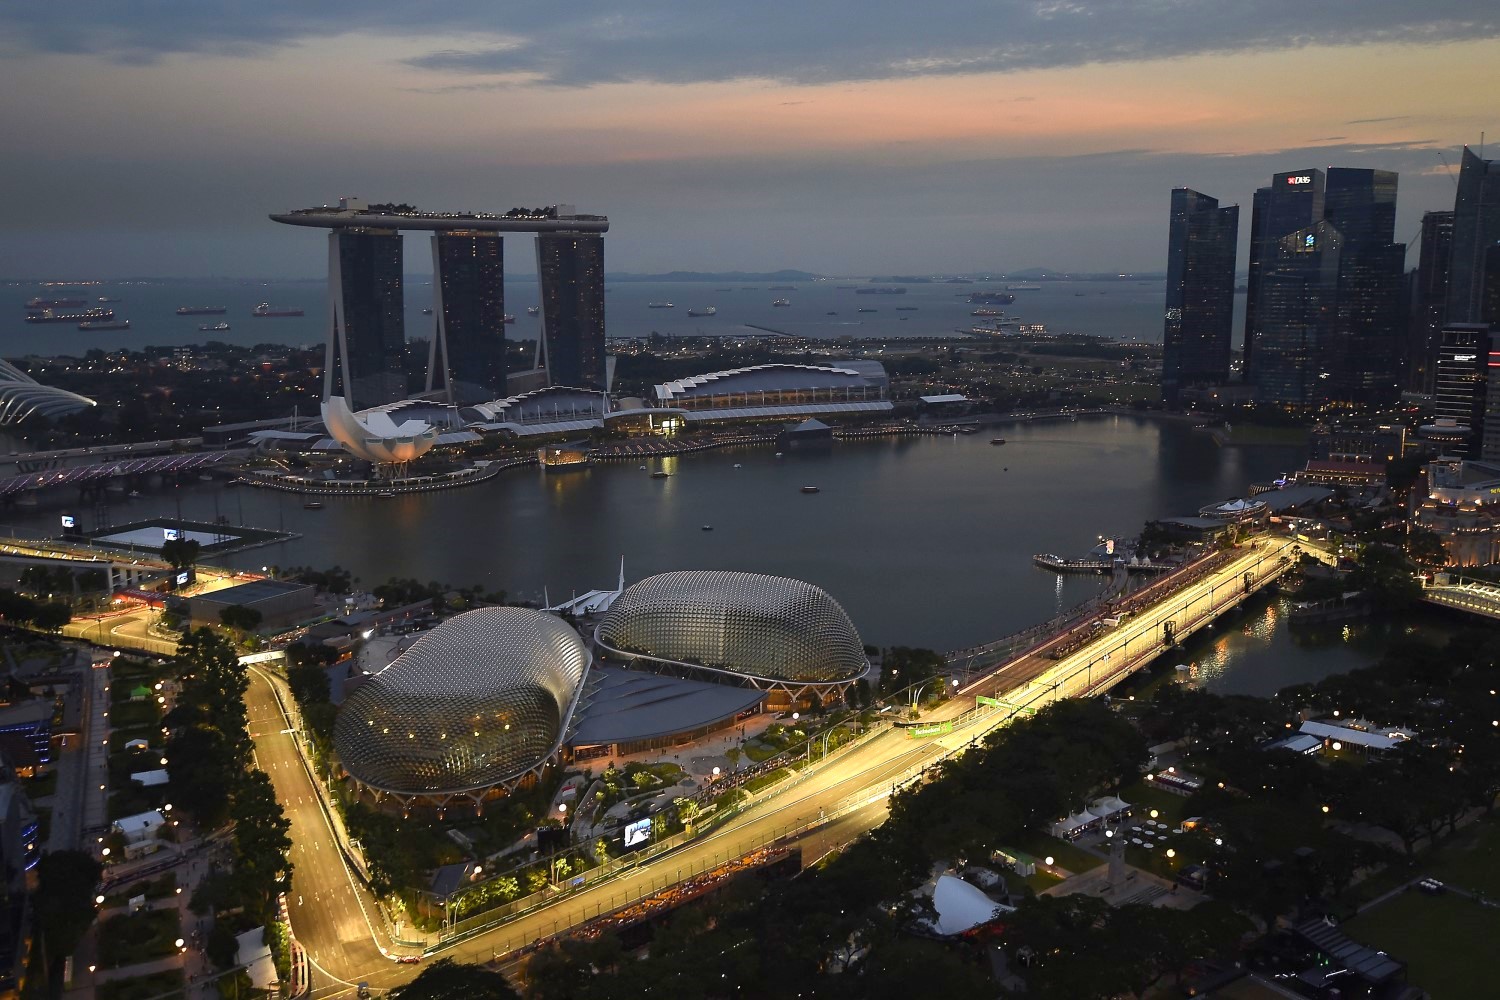 Singapore too spectacular to not be on F1 calendar